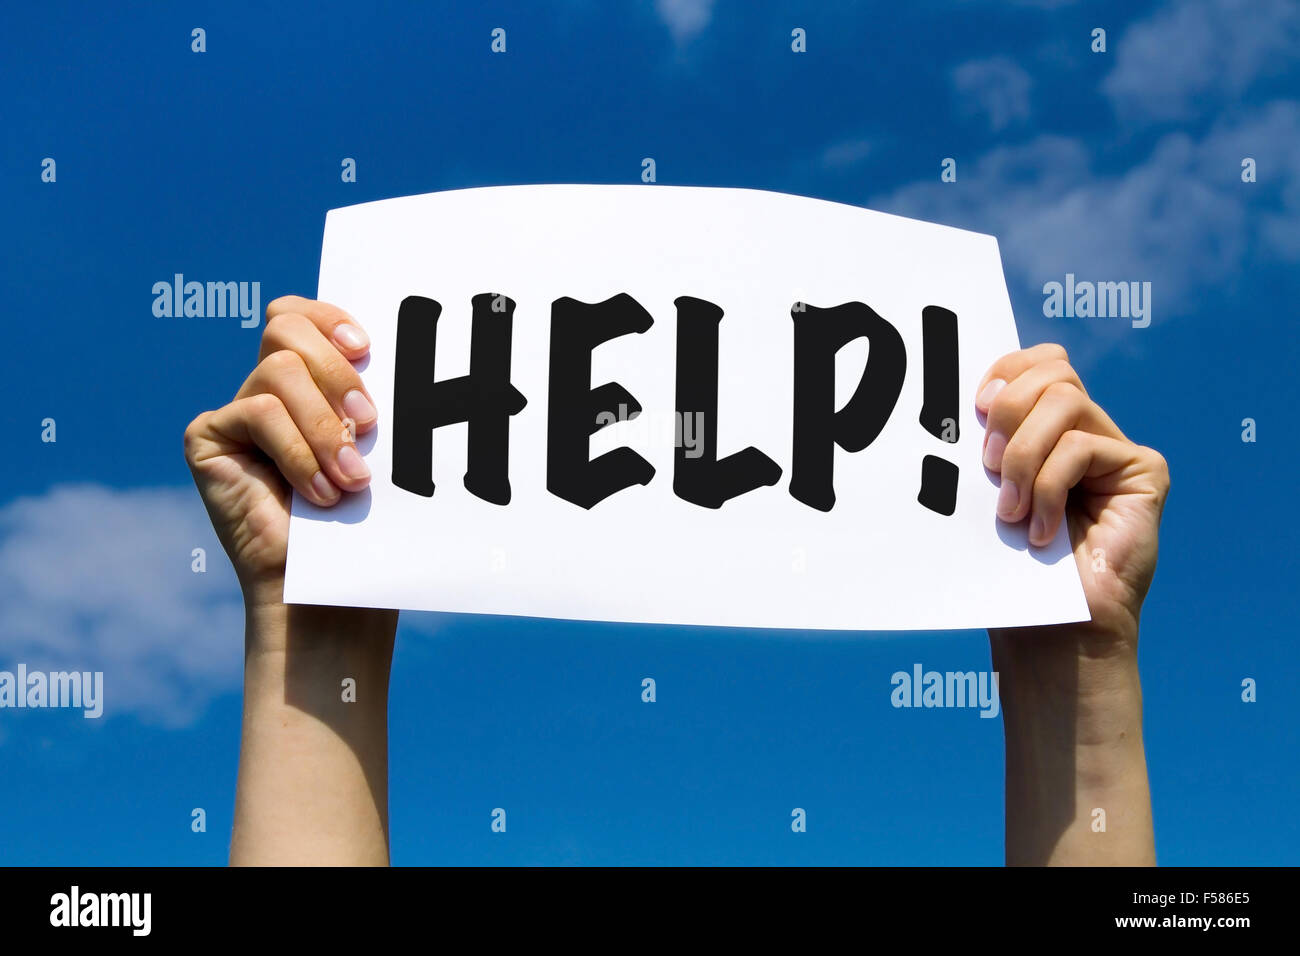 Help sign in hands on blue sky background Stock Photo